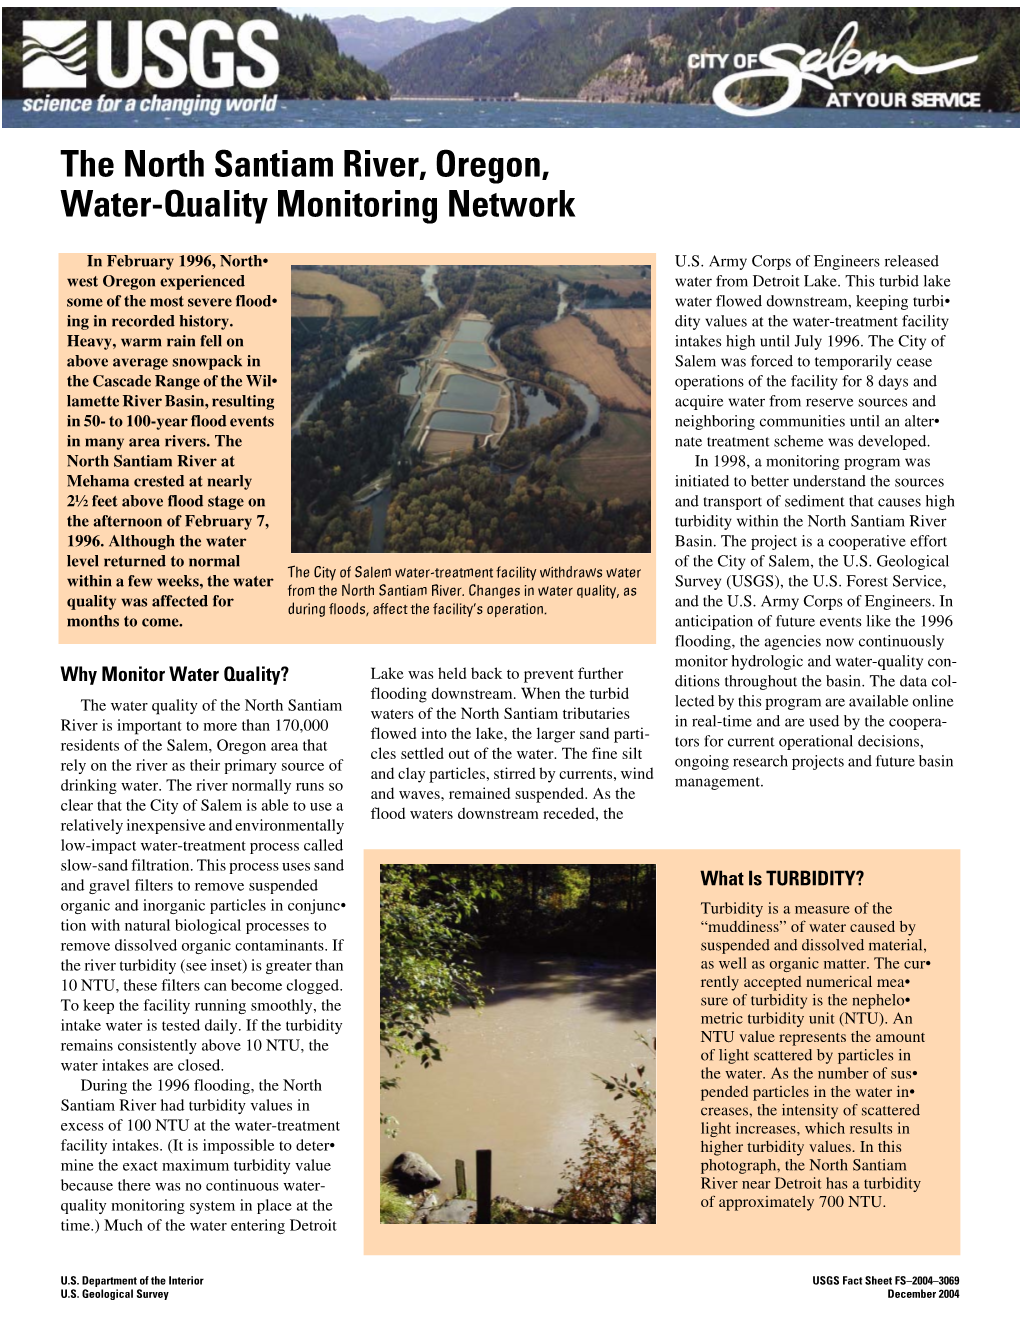 The North Santiam River, Oregon, Water-Quality Monitoring Network